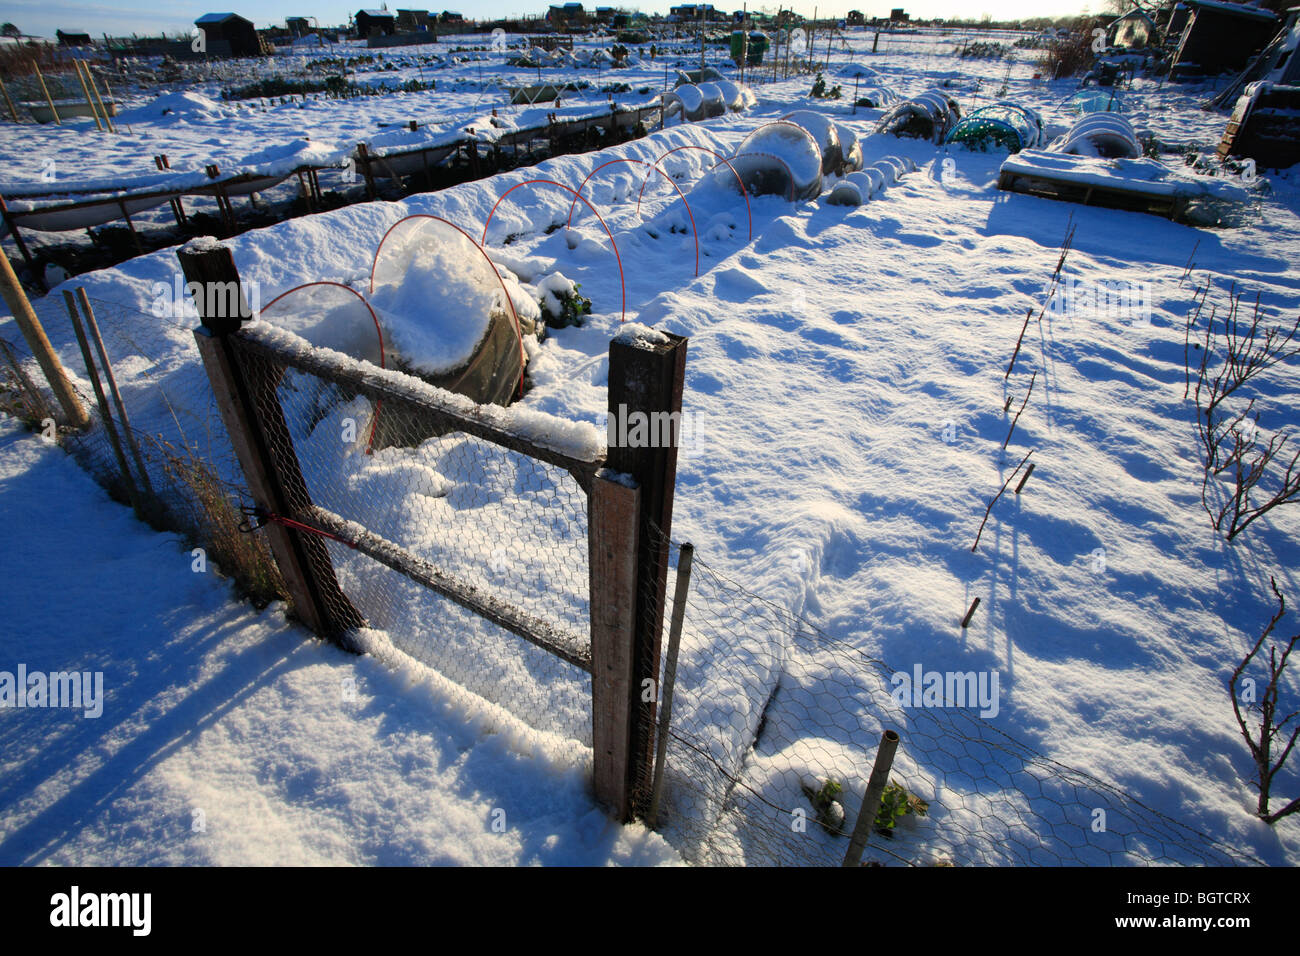 Allotments in winter covered with snow at Heacham, Norfolk. Stock Photo